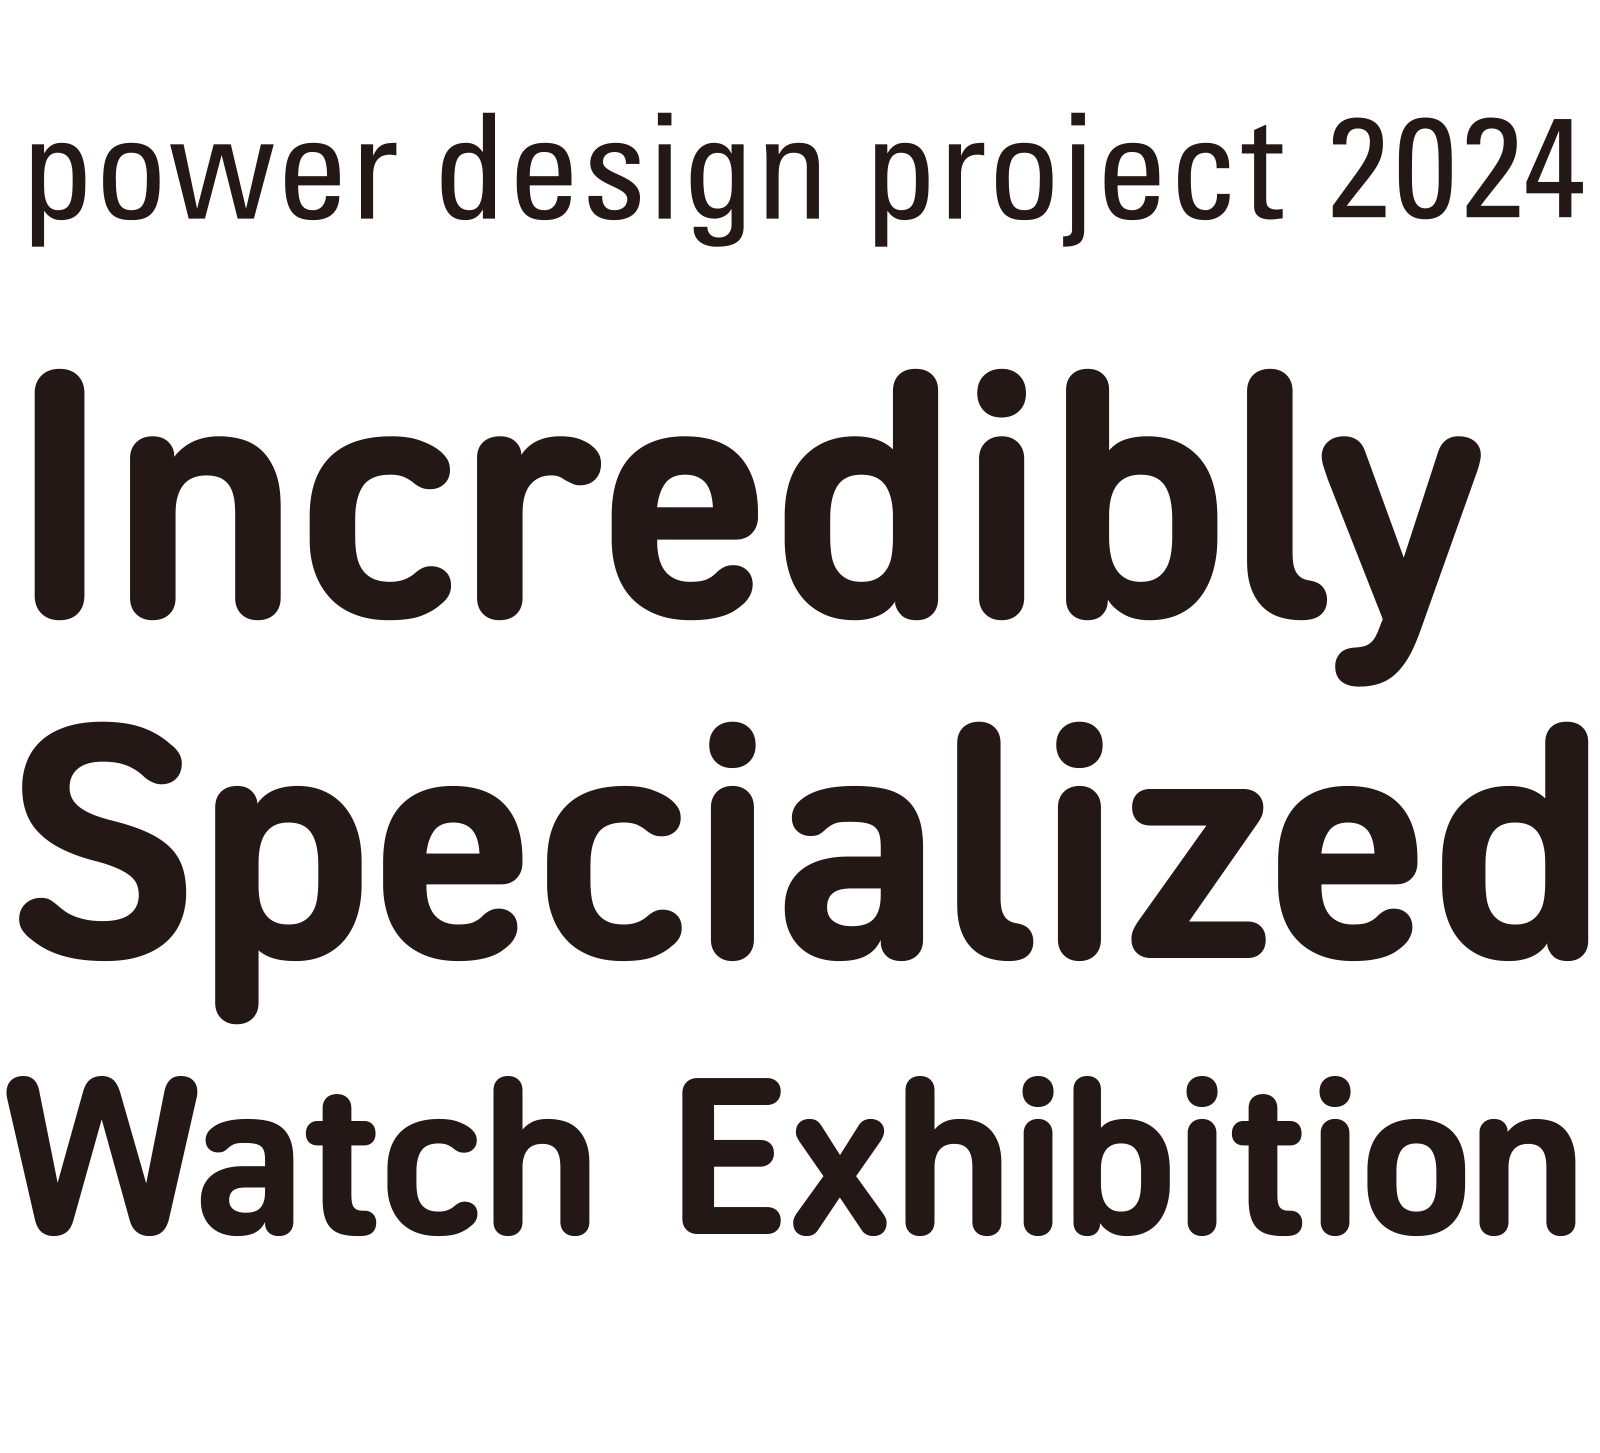 Power Design Project 2024 Incredibly Specialized Watch Exhibition